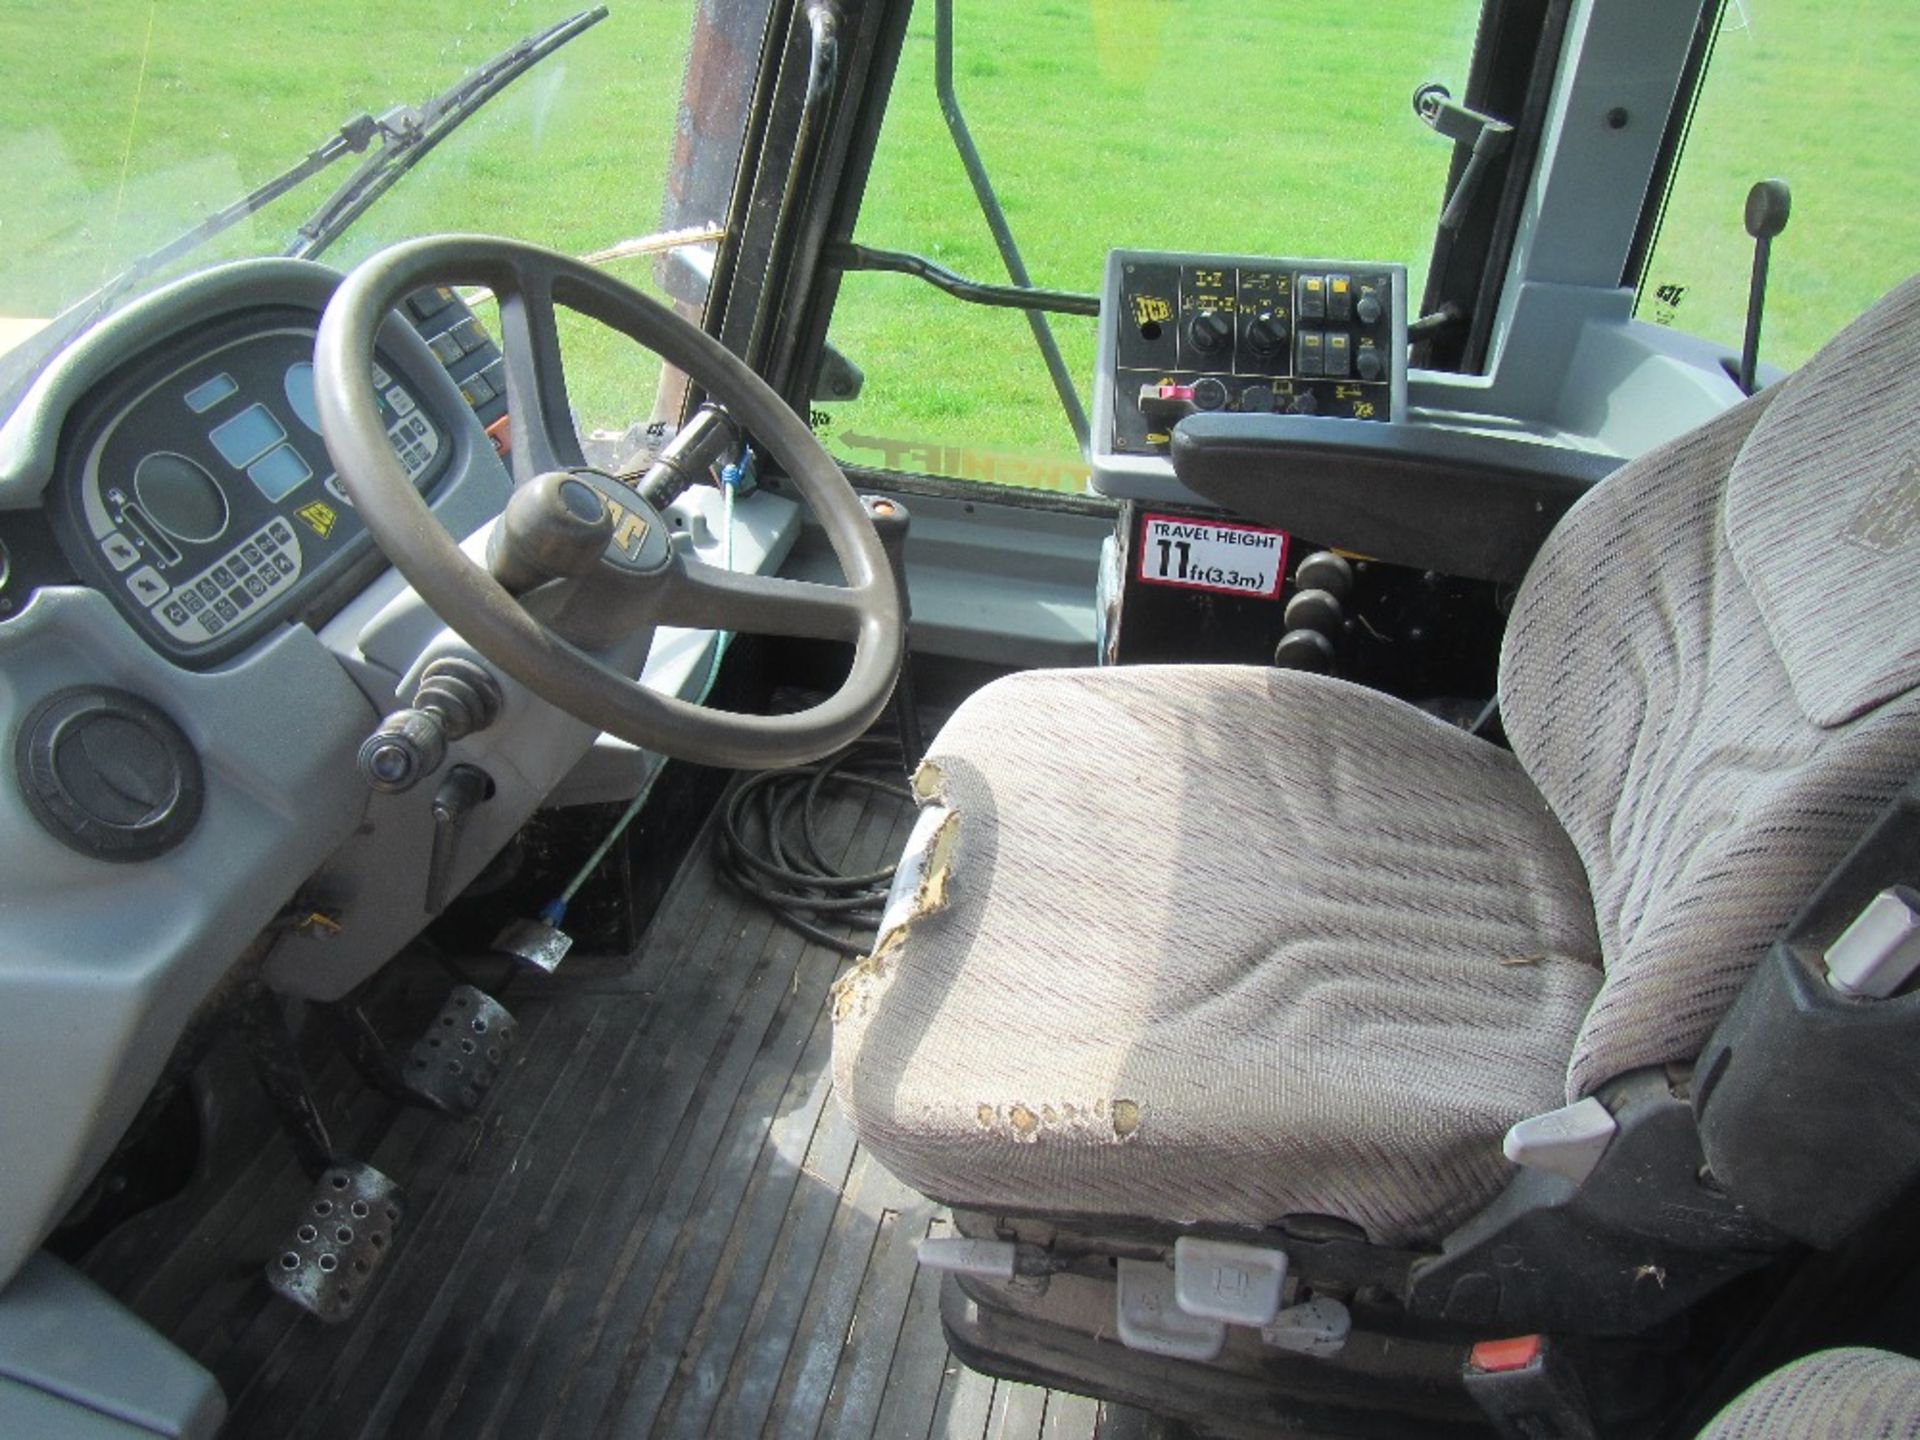 2001 JCB FASTRAC 3185 Smooth Shift TRACTOR fitted with front links Reg. No. Y984 TKO Serial No. - Image 9 of 11